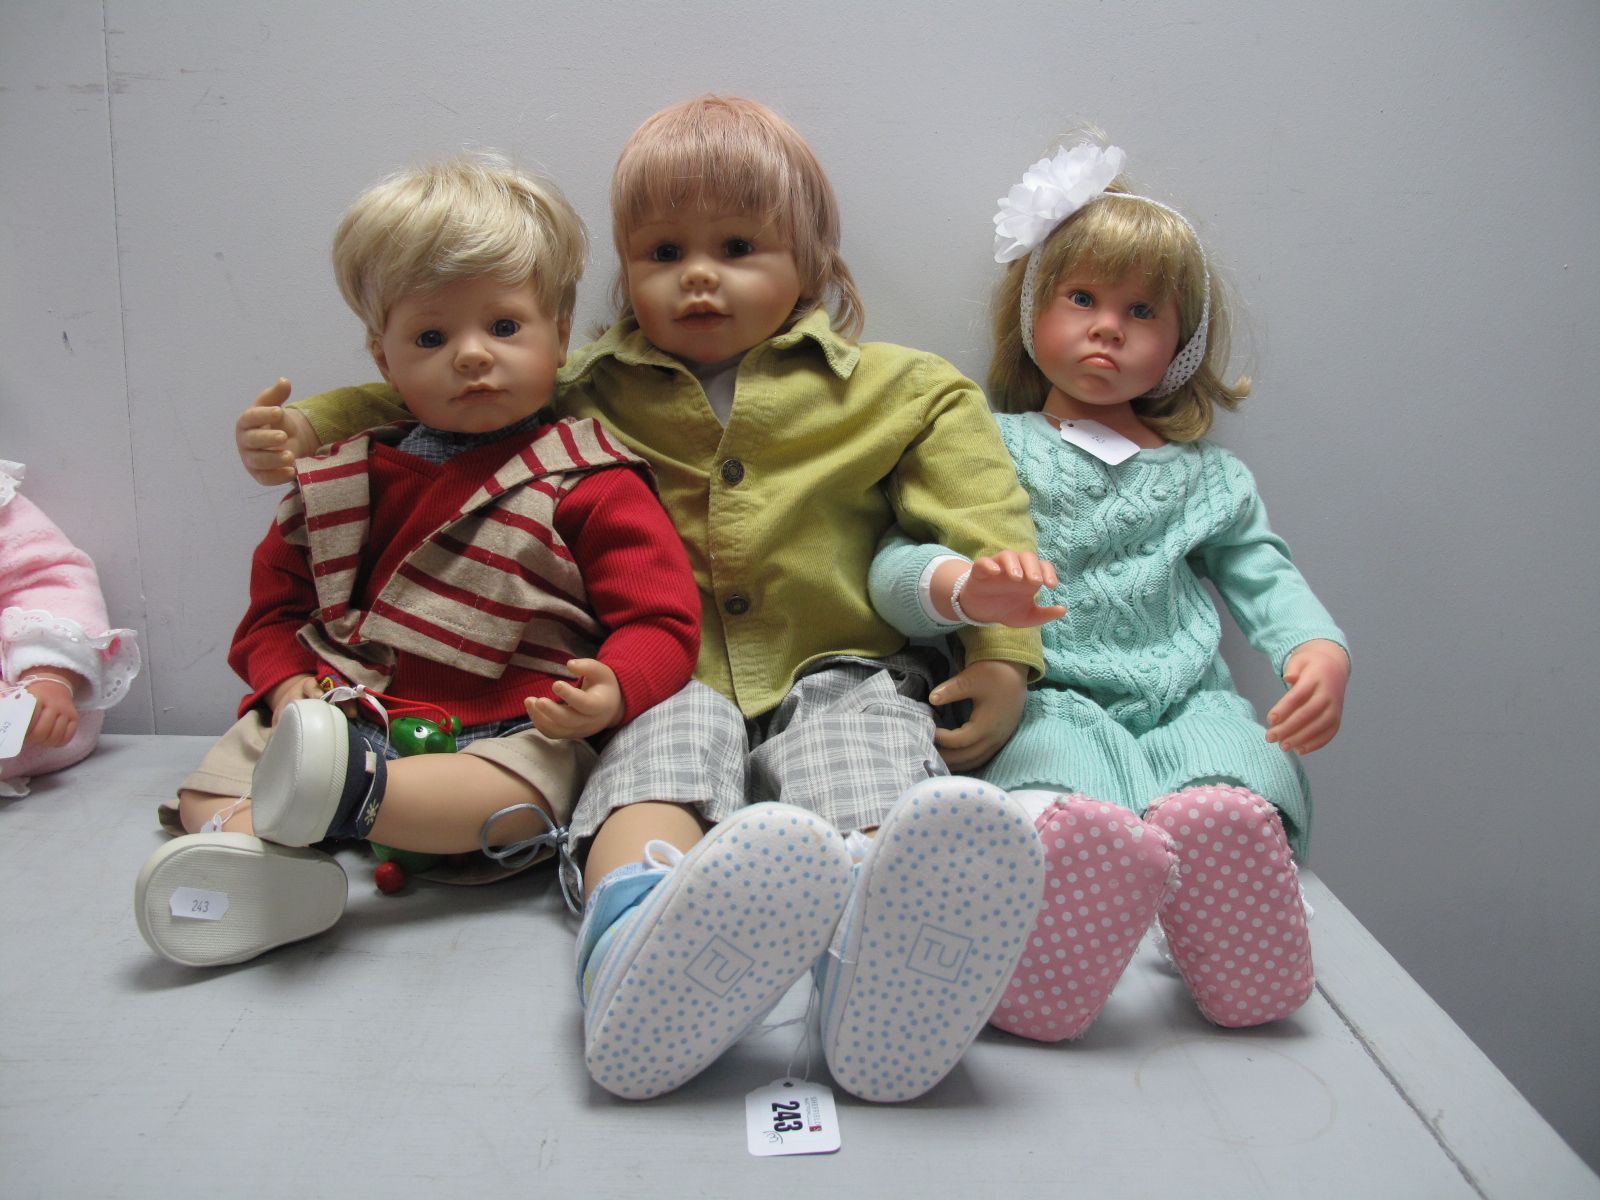 A W. Hanl Boy Toddler Doll, 72cm high, another impressed 18 pi 2001 and an Ashton Drake Galleries